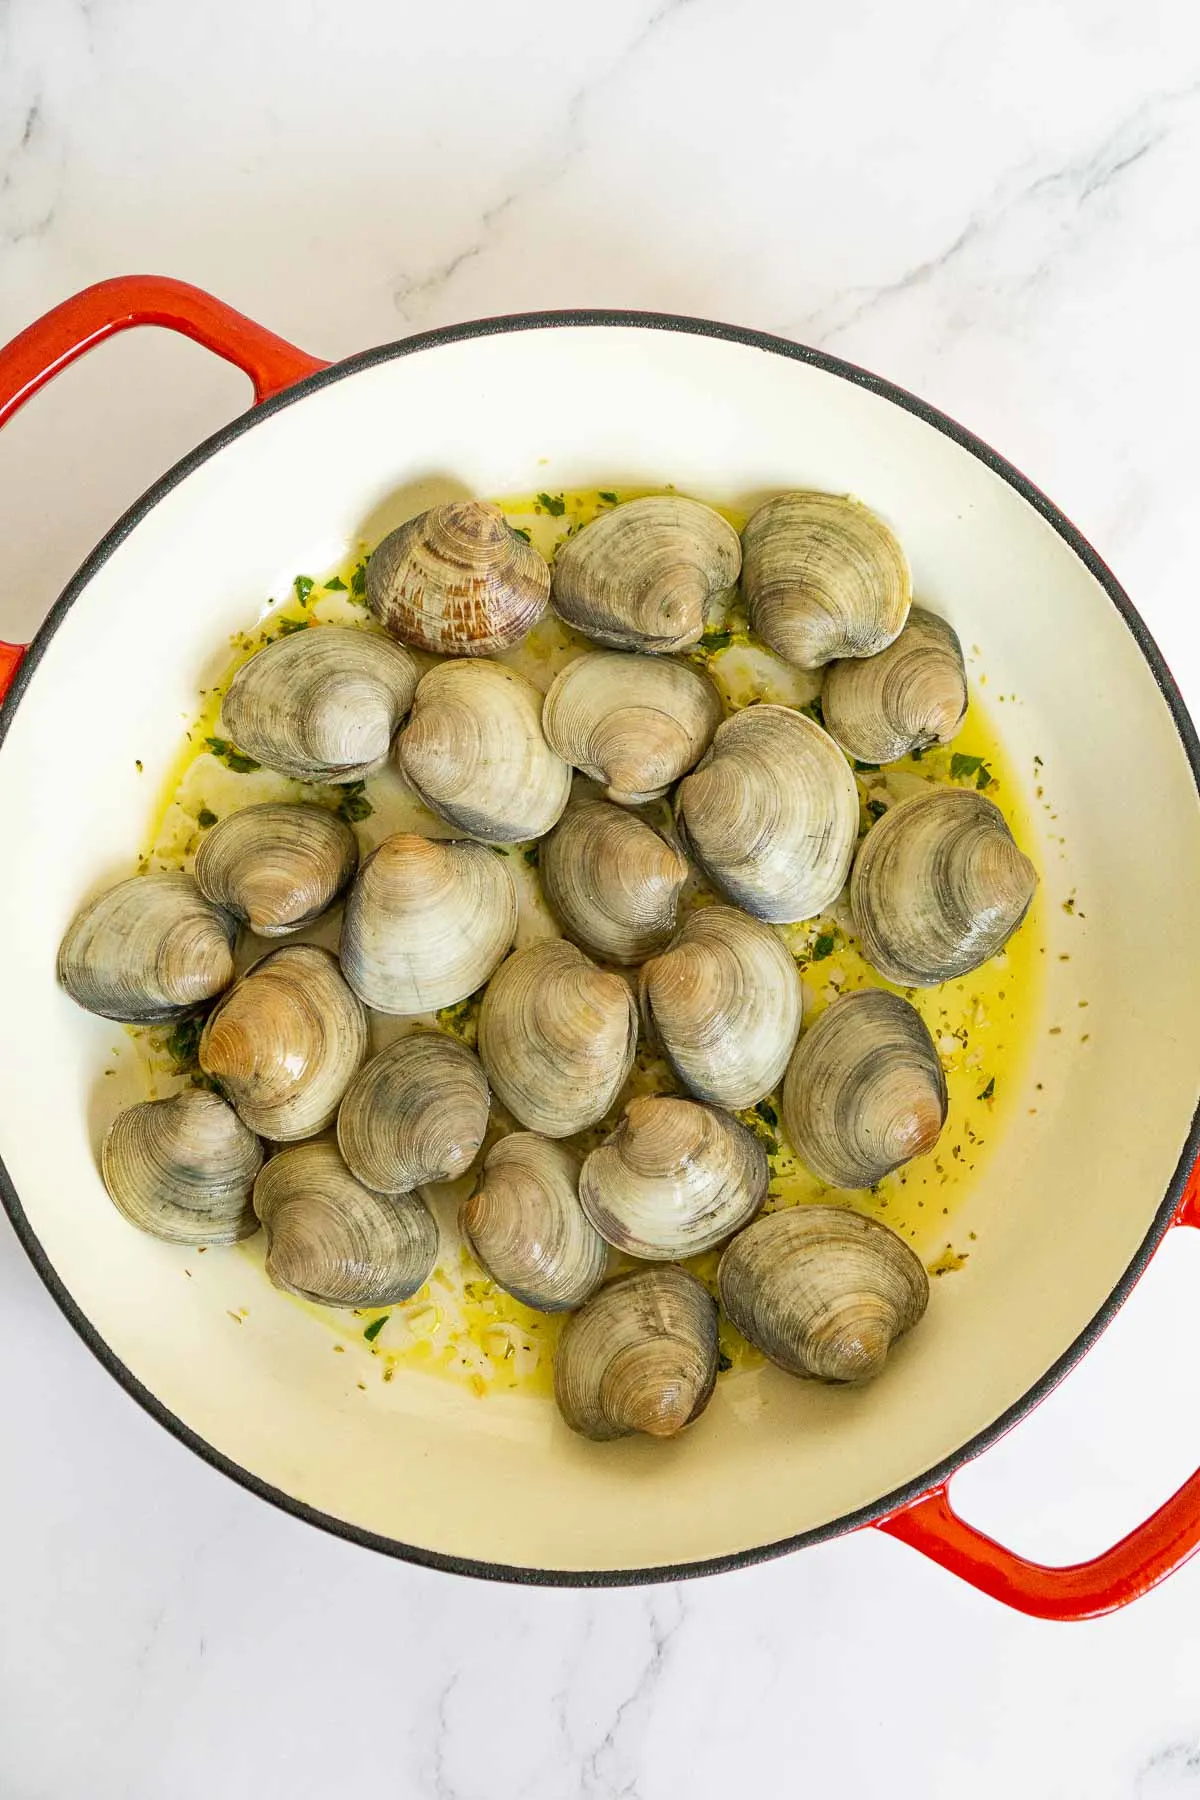 Clams steaming in white wine sauce with lemon juice and oregano